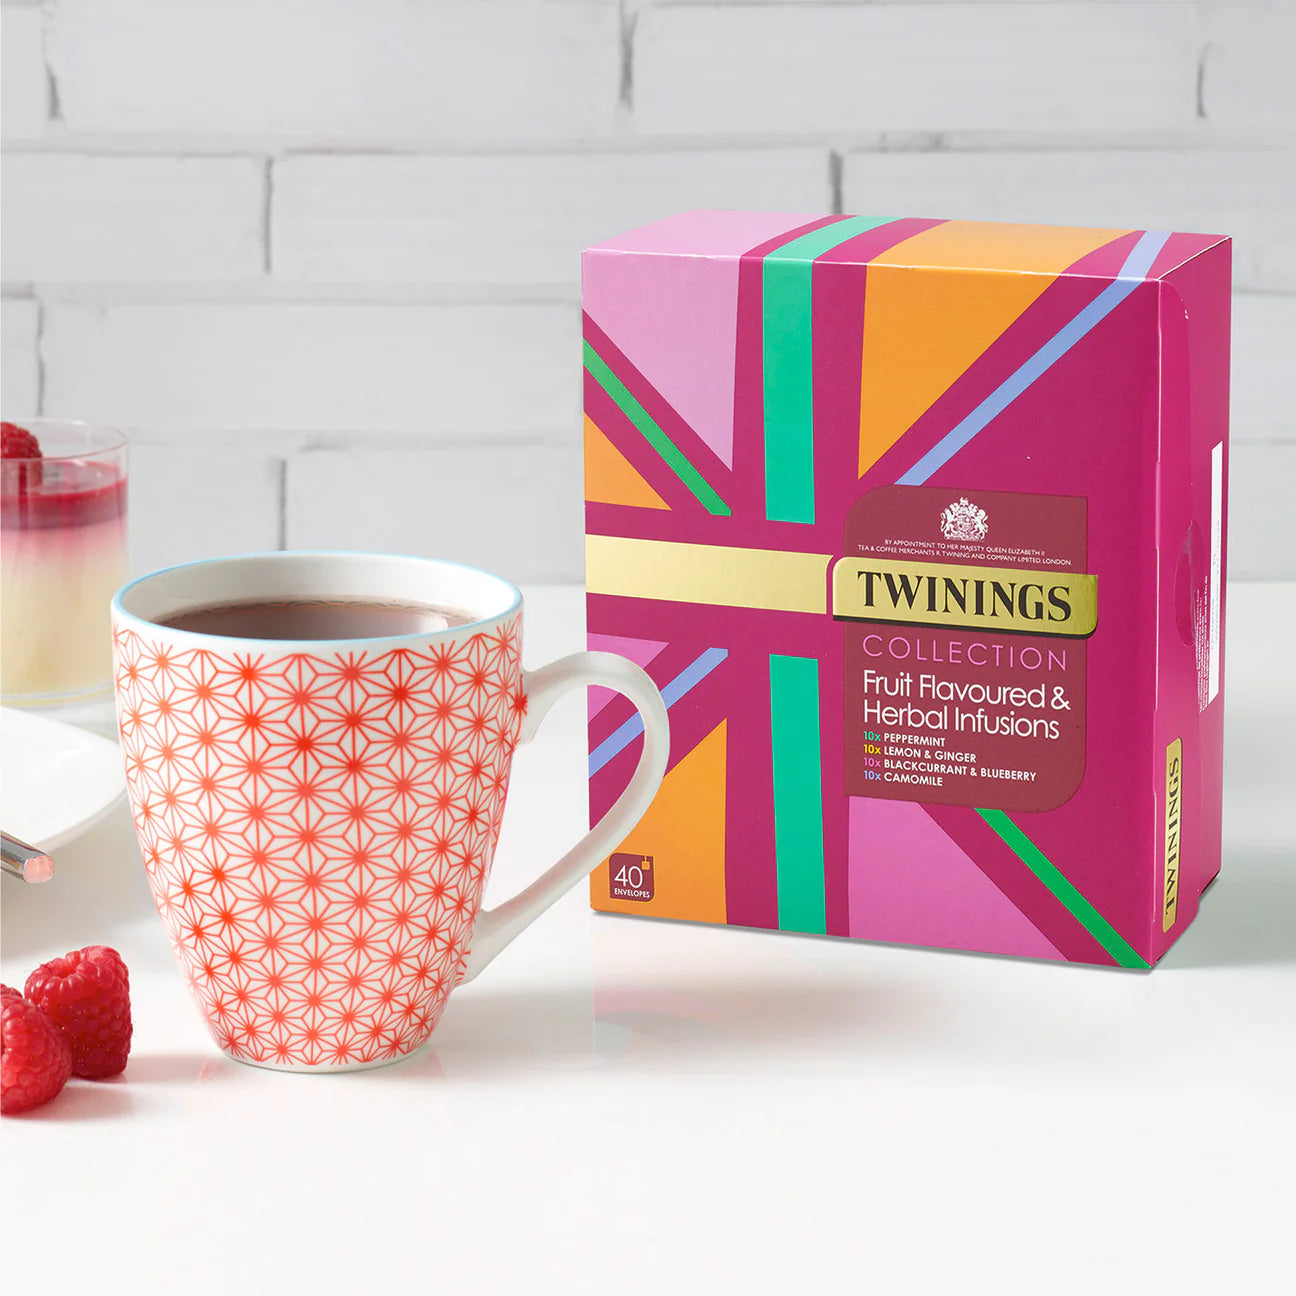 Twinings Fruit Flavoured & Herbal Infusions Gift Box (40 Envelopes) - Vending Superstore